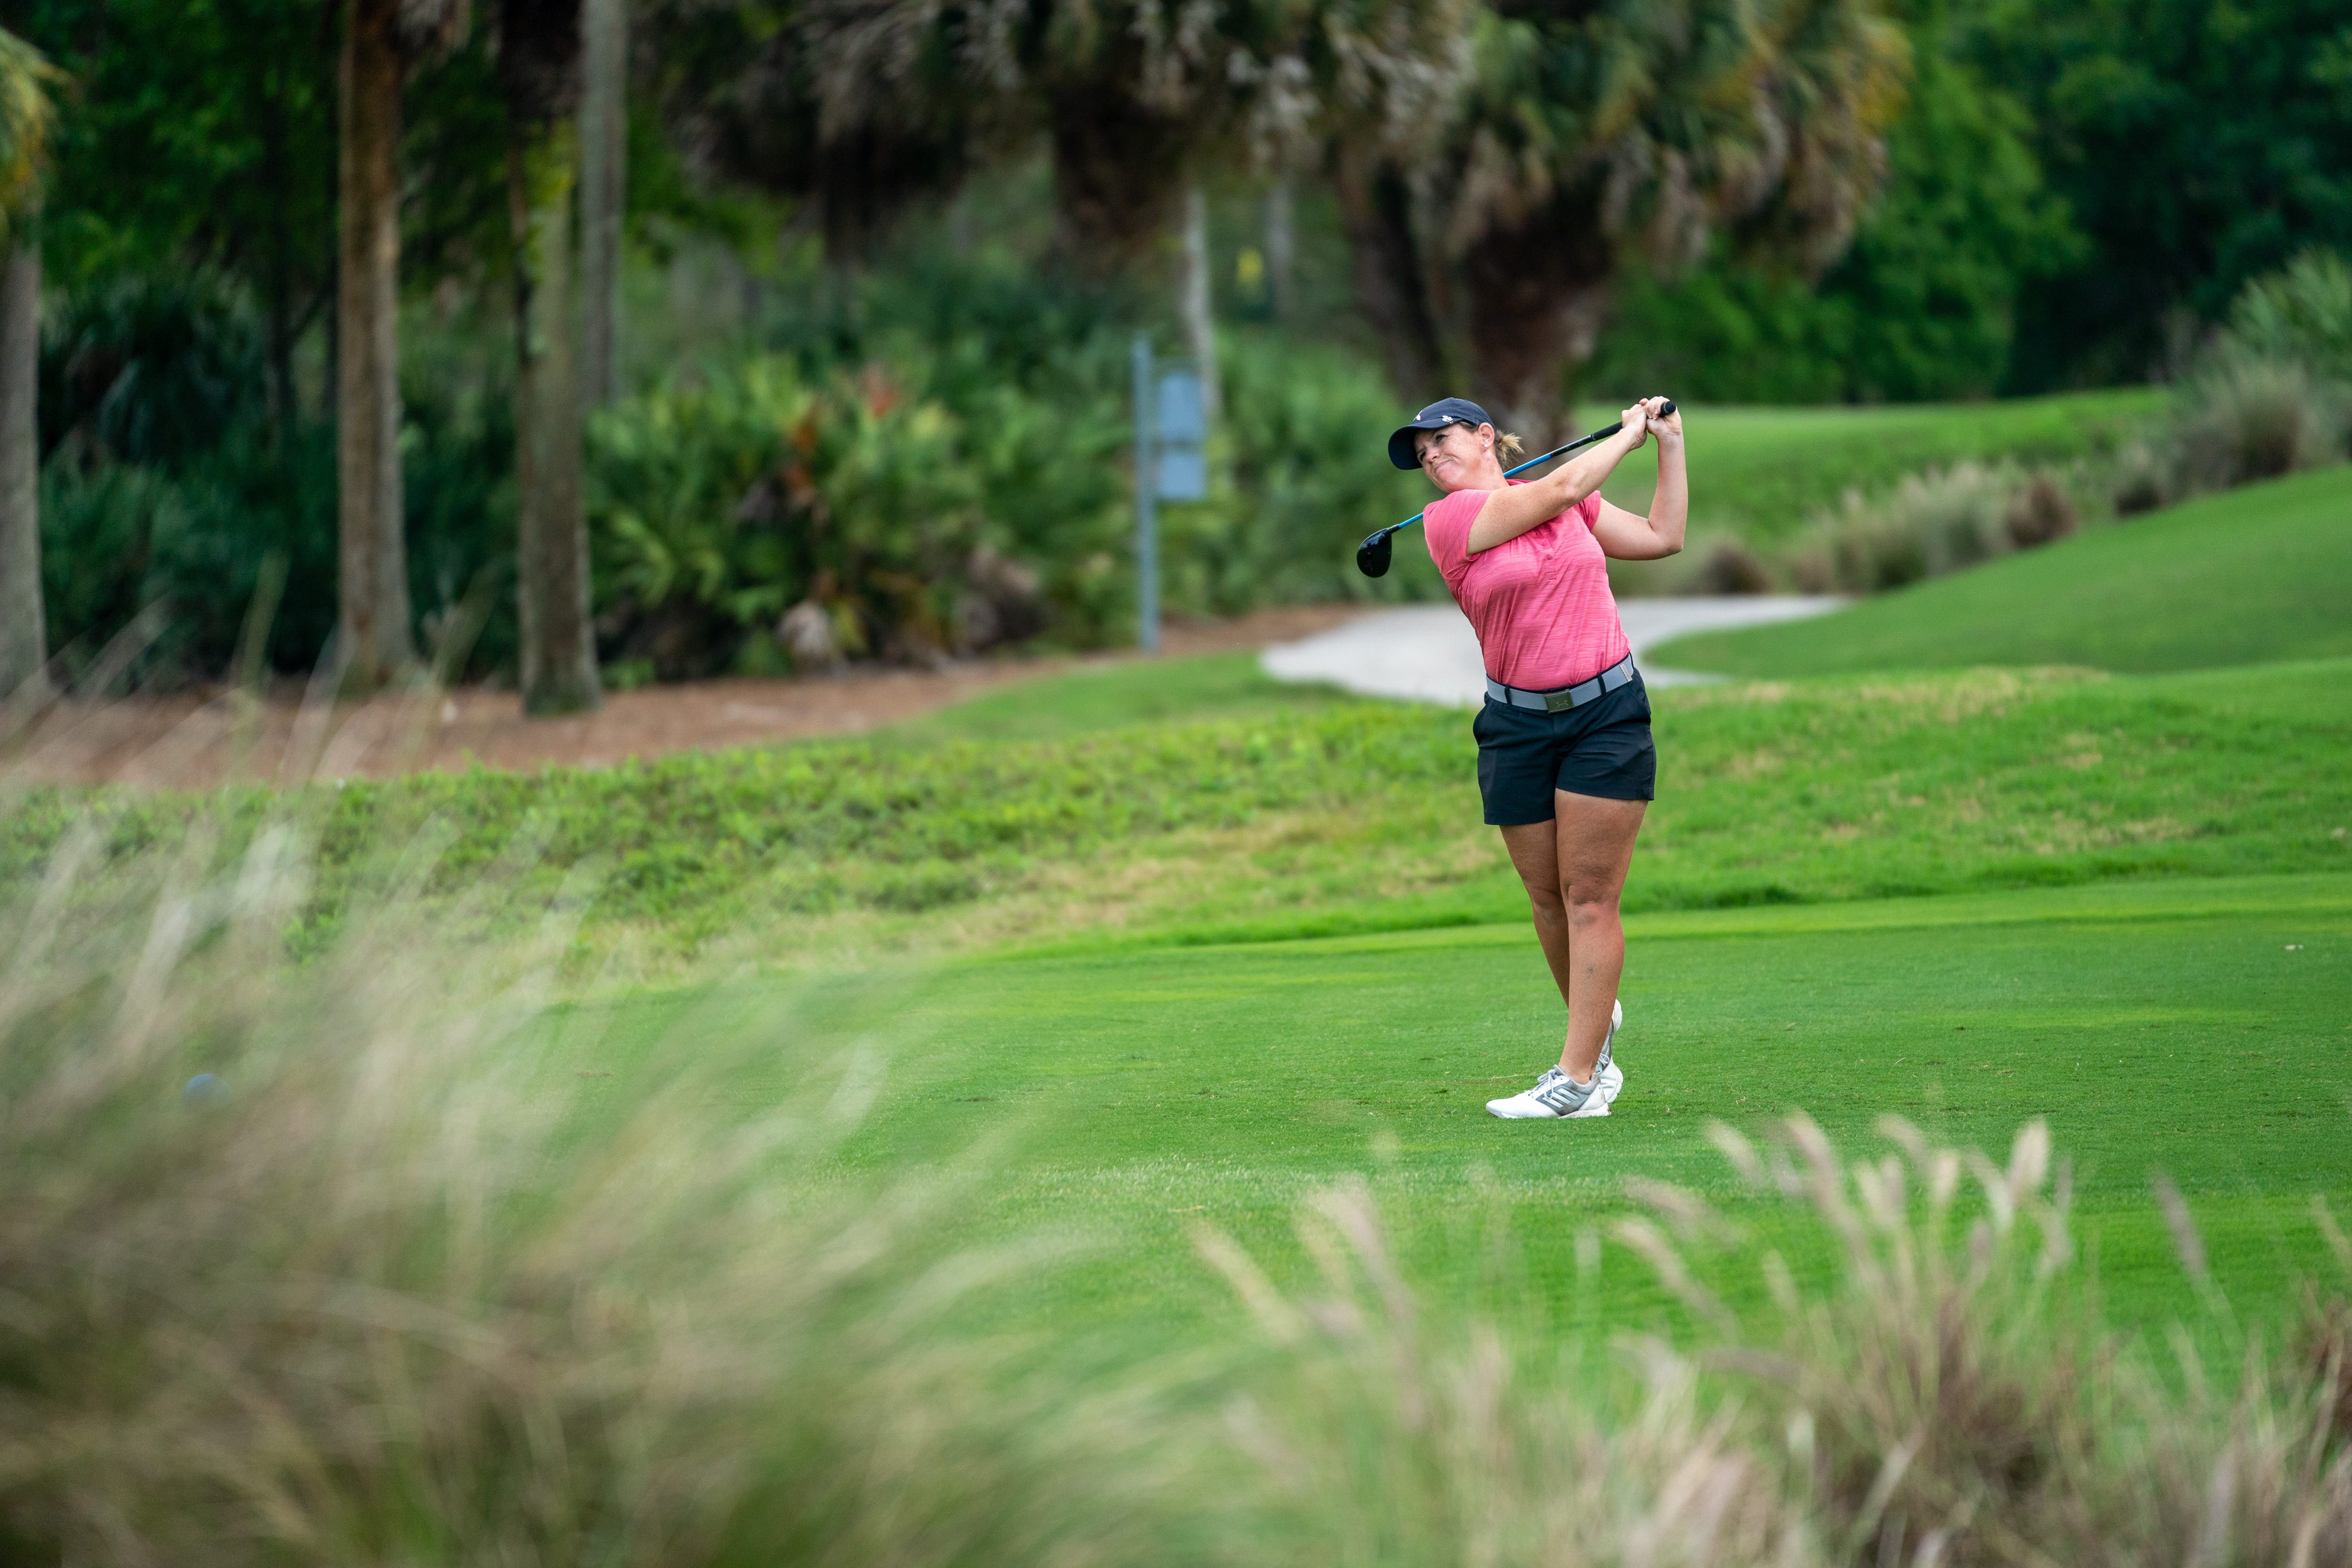 Stephanie Connelly-Eiswerth tees off on the 18th hole of the Wanamaker during the final round of the 2021 Women's Stroke Play Championship at PGA Golf Club in Port St. Lucie, Florida. (Photo by Rachel Harris/PGA of America)